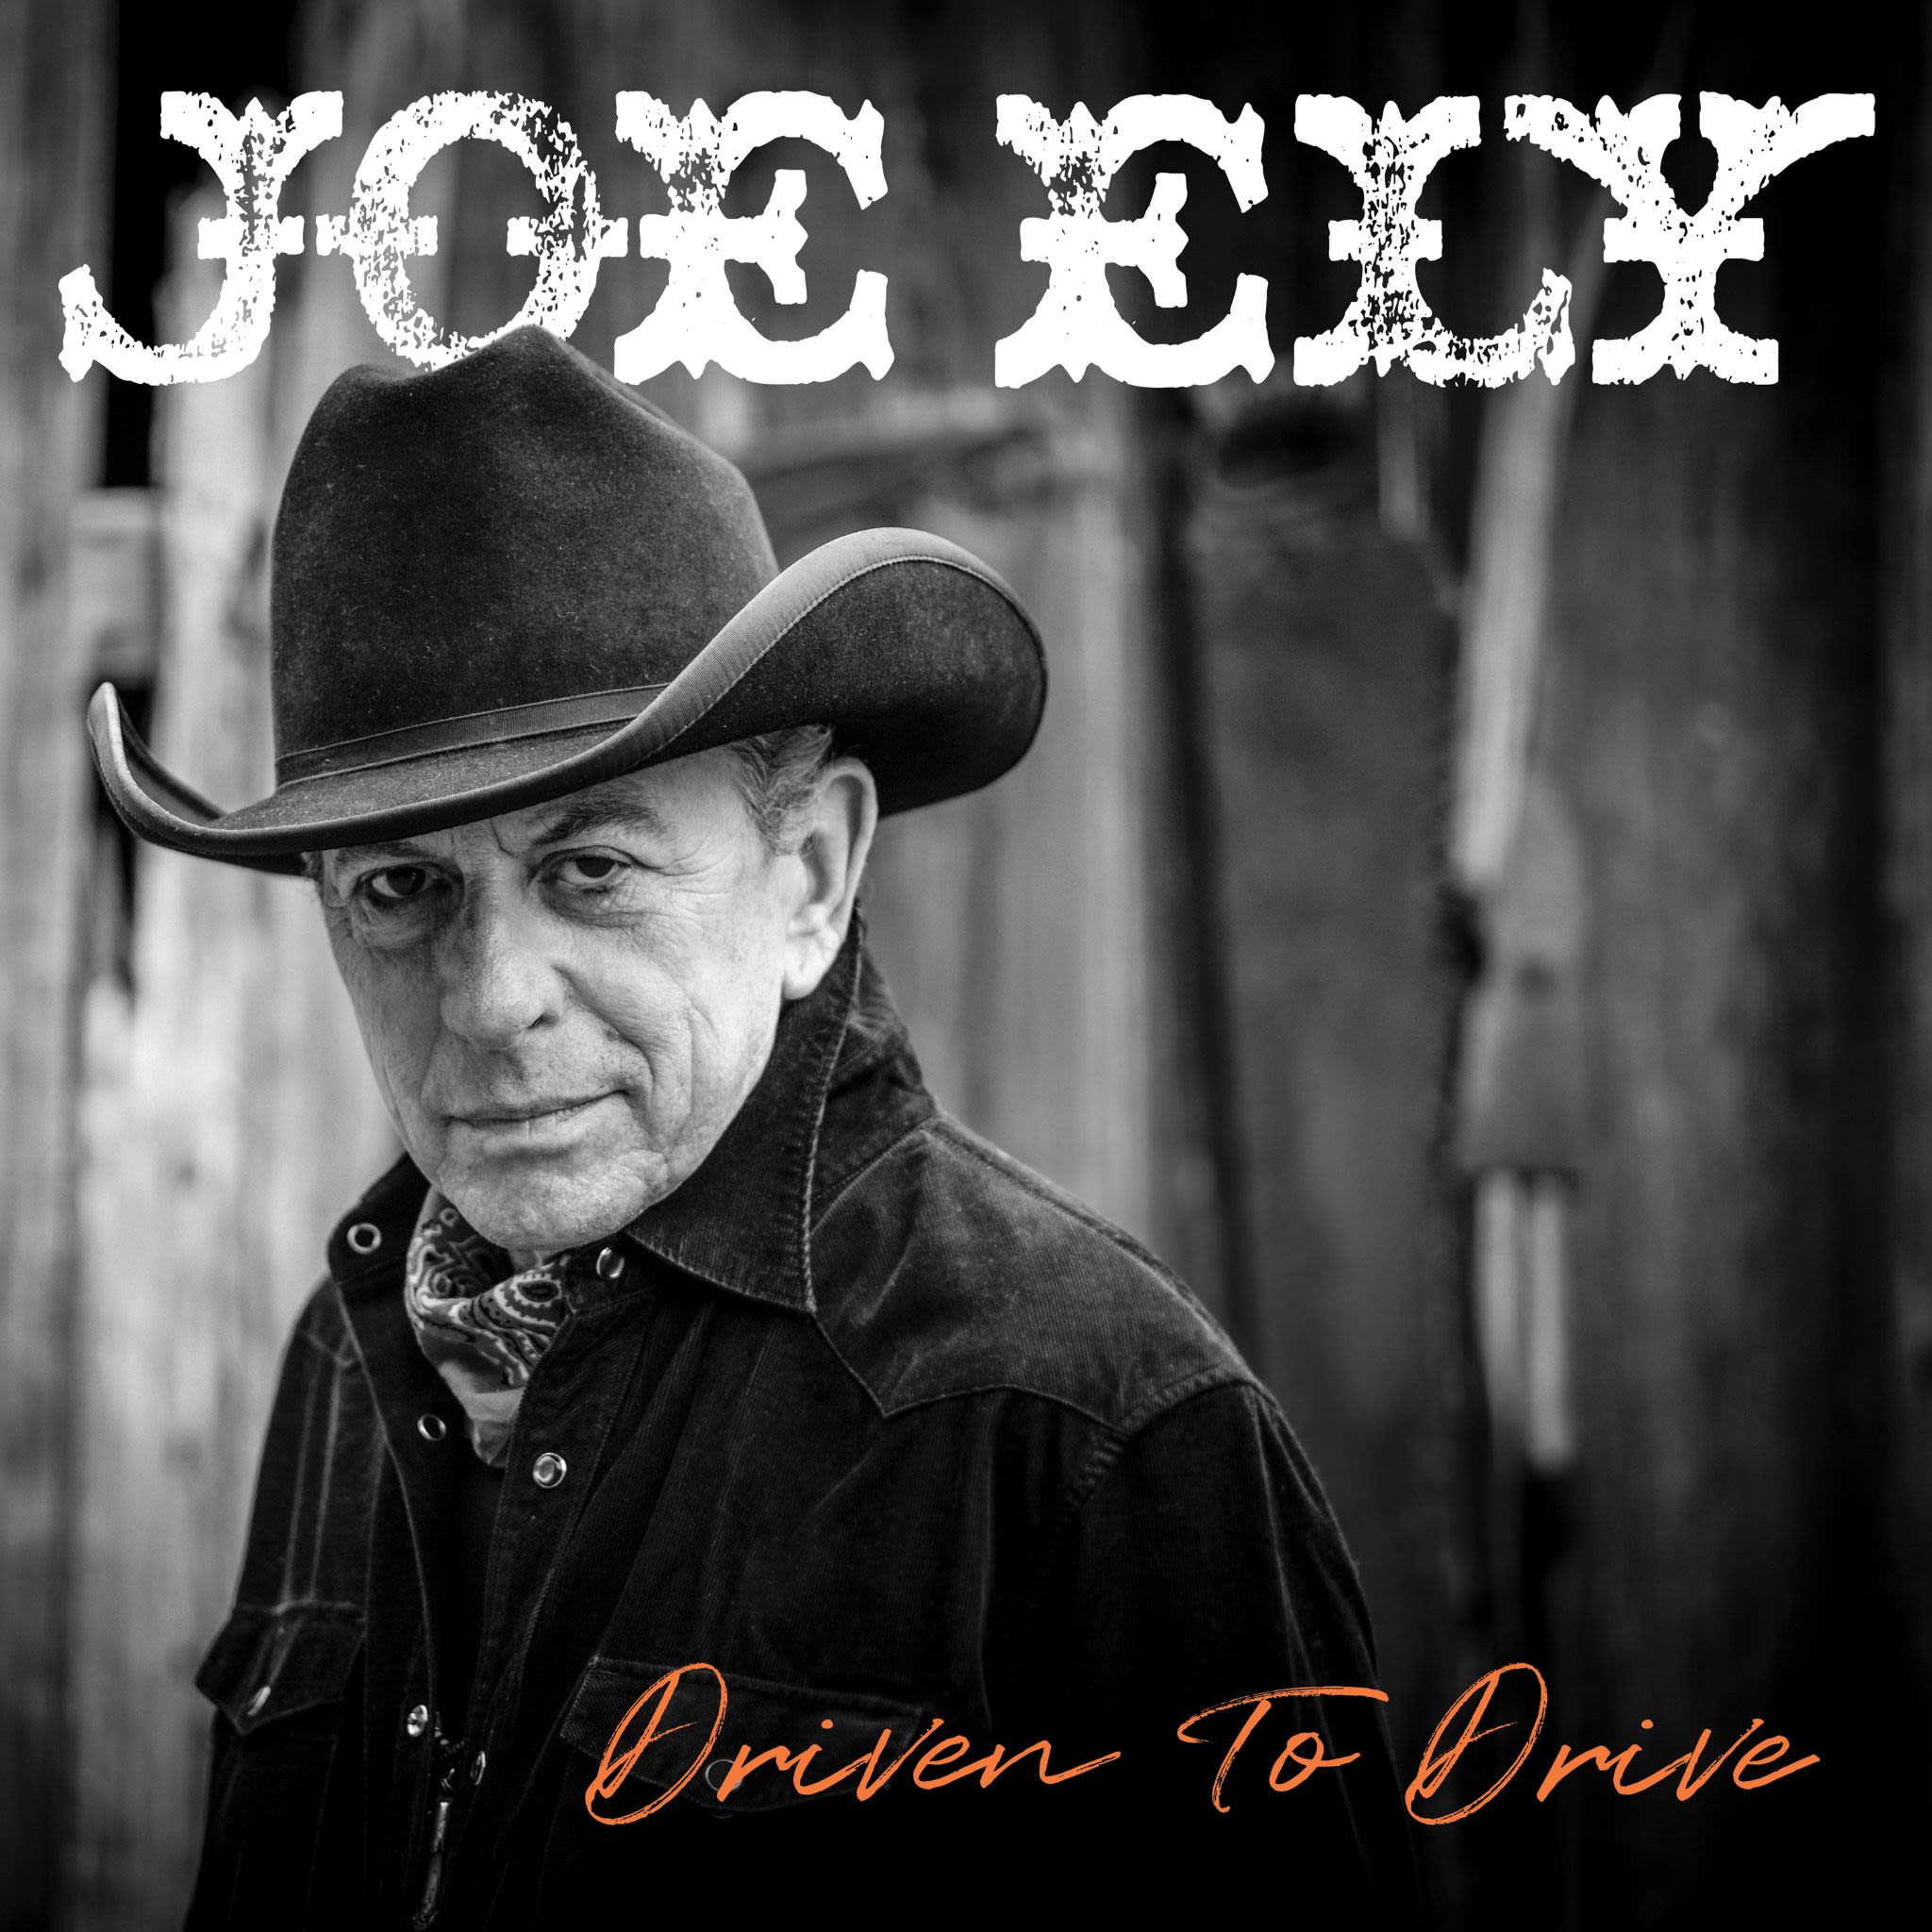 Joe Ely Announces New Album 'Driven to Drive': Hear "Odds Of The Blues" (Feat. Bruce Springsteen)